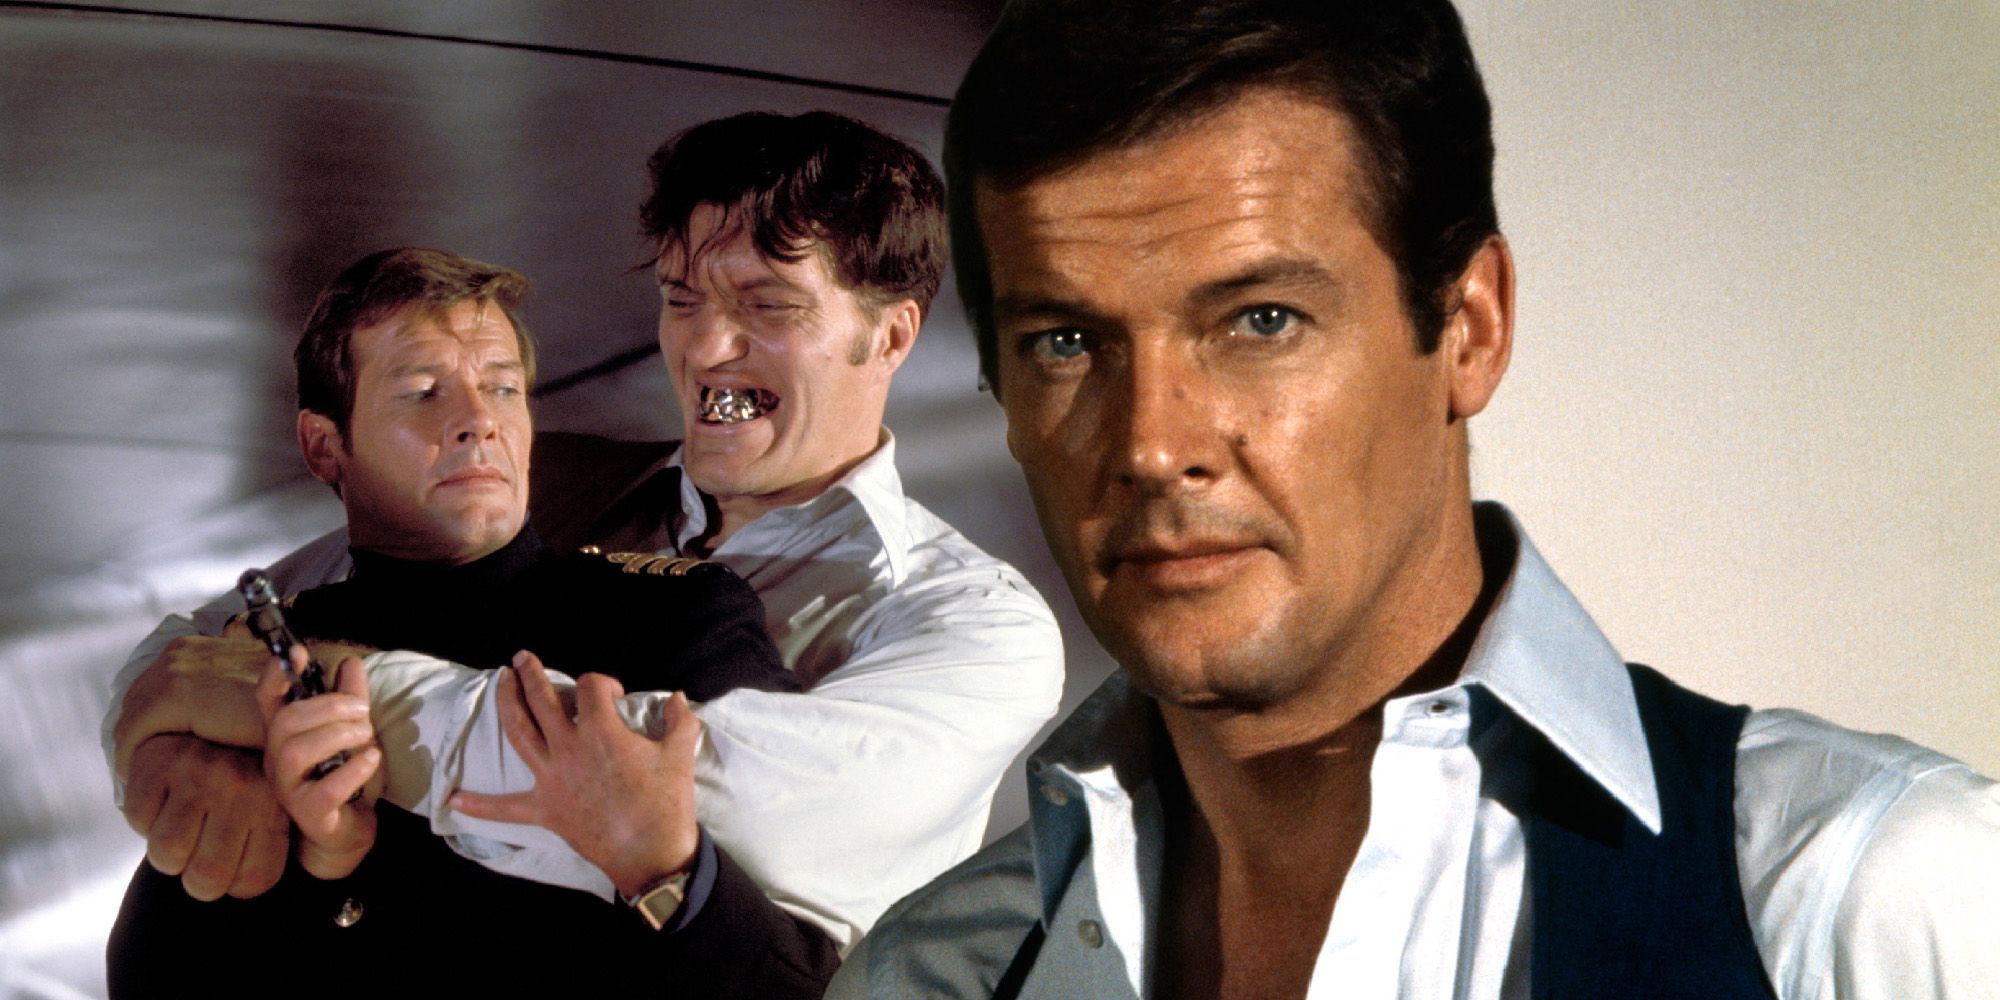 James Bond: Why Jaws Didn't Return In For Your Eyes Only